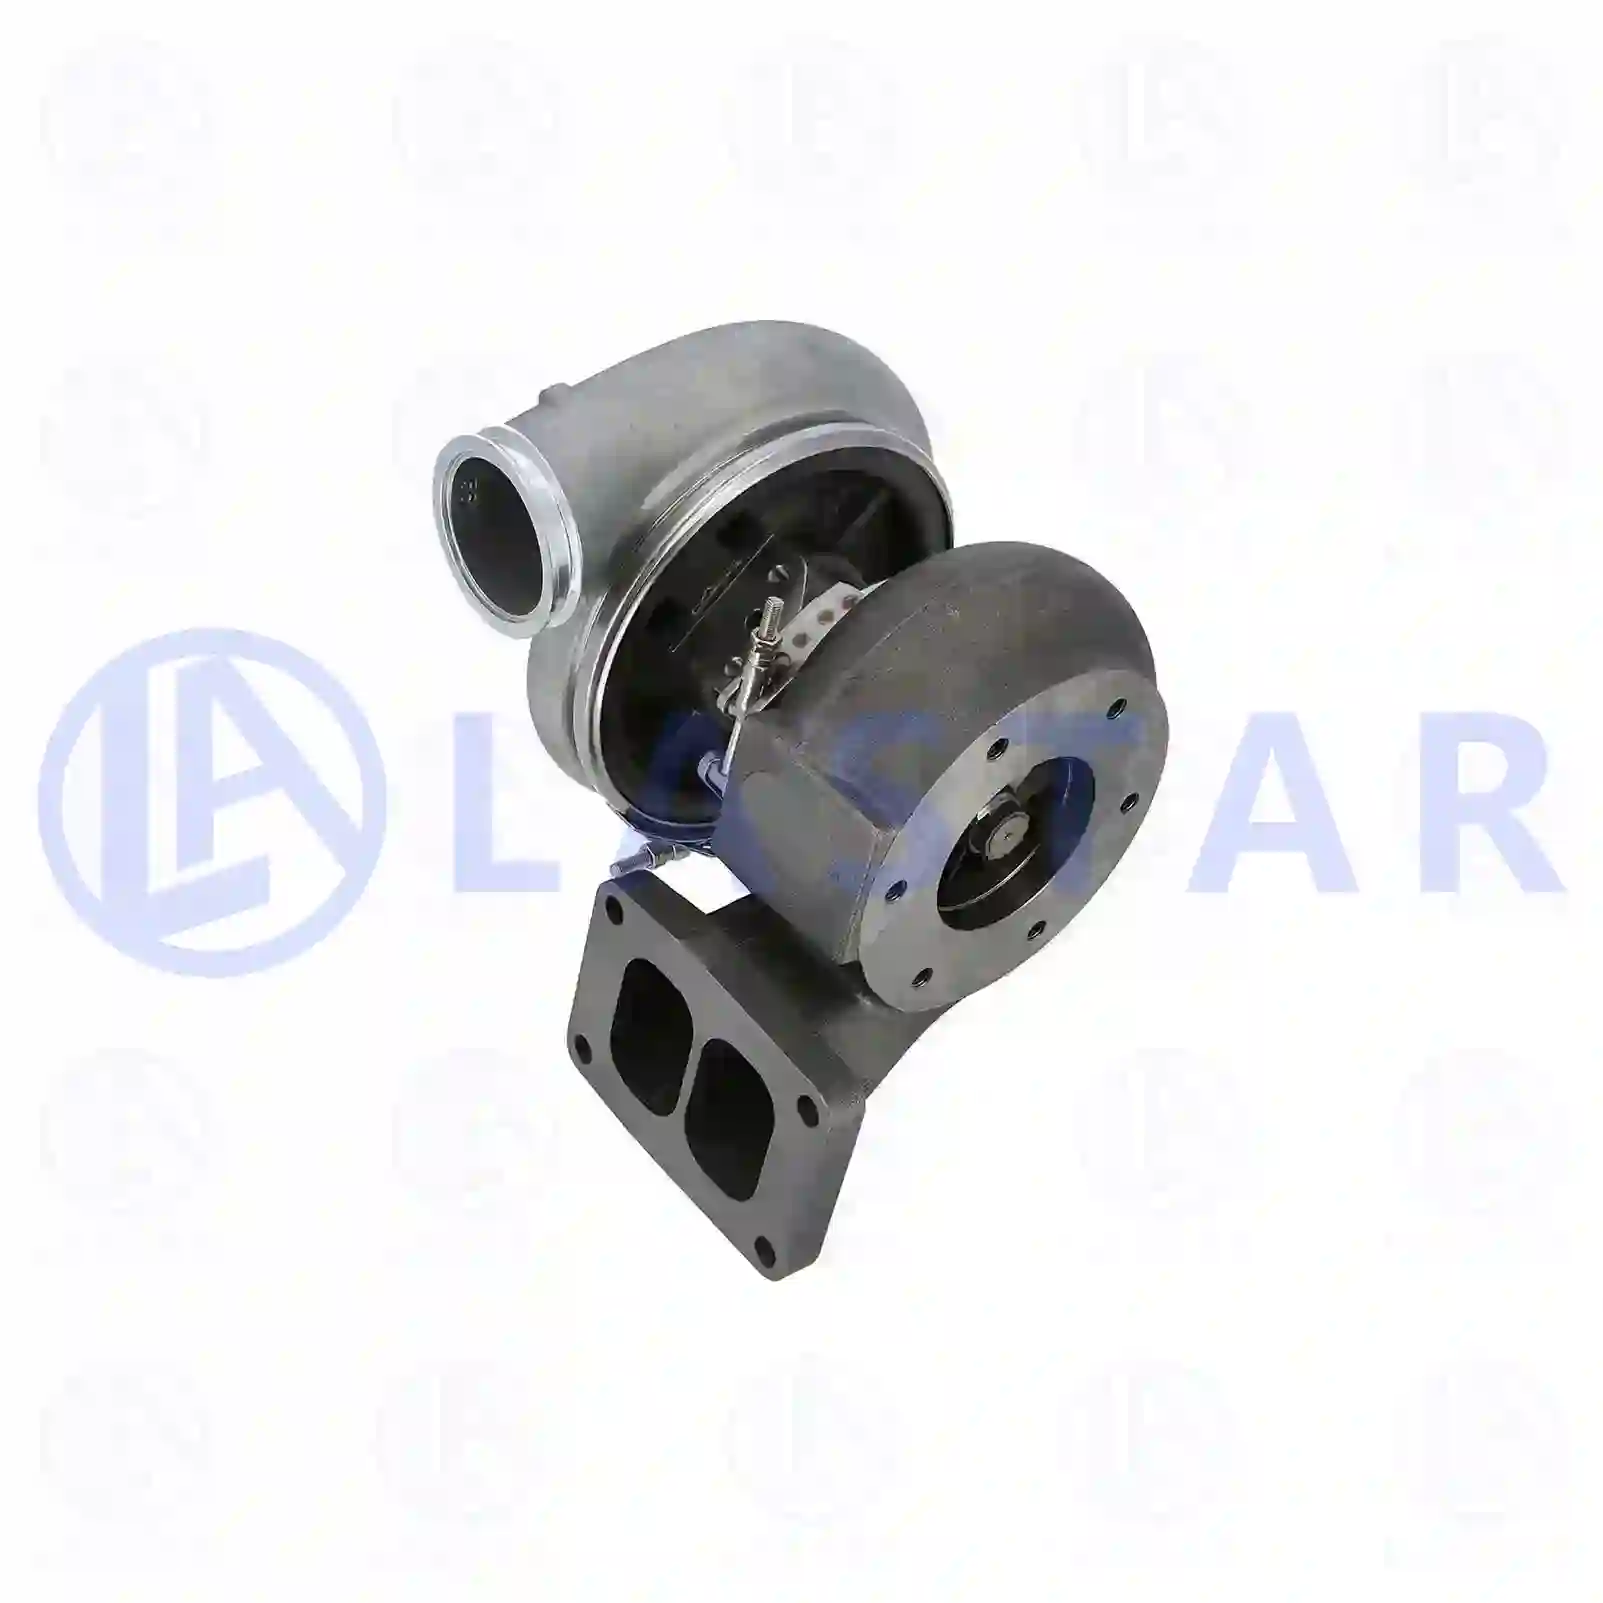 Turbocharger, with gasket kit, 77704557, 51091007379, 5109 ||  77704557 Lastar Spare Part | Truck Spare Parts, Auotomotive Spare Parts Turbocharger, with gasket kit, 77704557, 51091007379, 5109 ||  77704557 Lastar Spare Part | Truck Spare Parts, Auotomotive Spare Parts